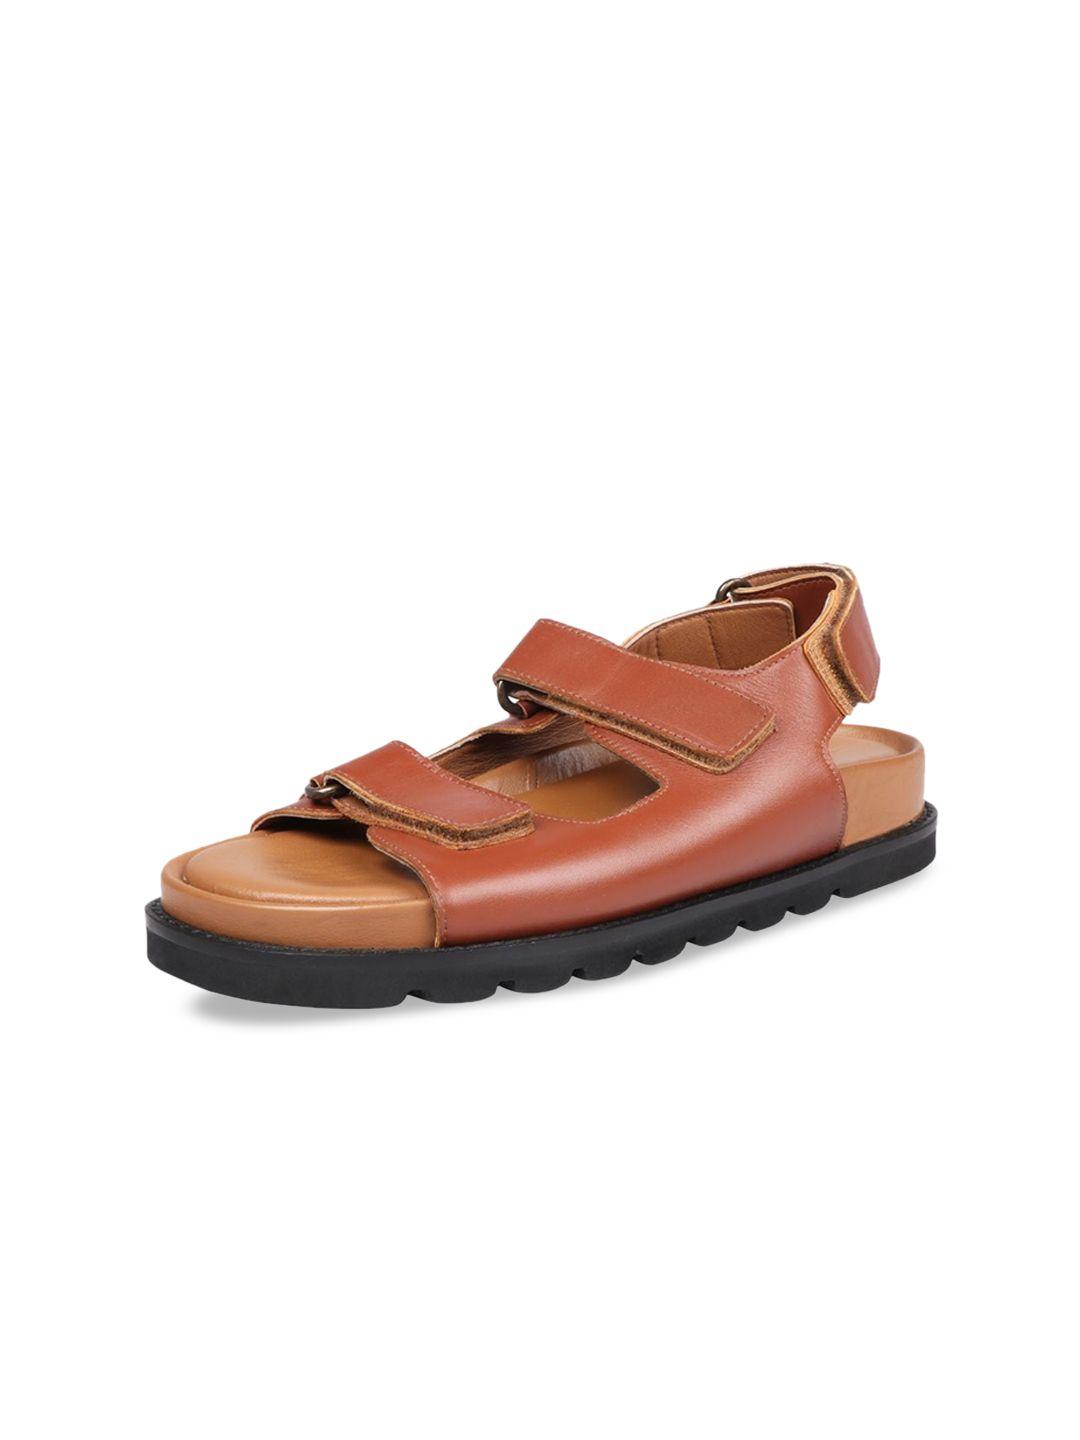 hidesign-leather-open-toe-flats-with-backstrap